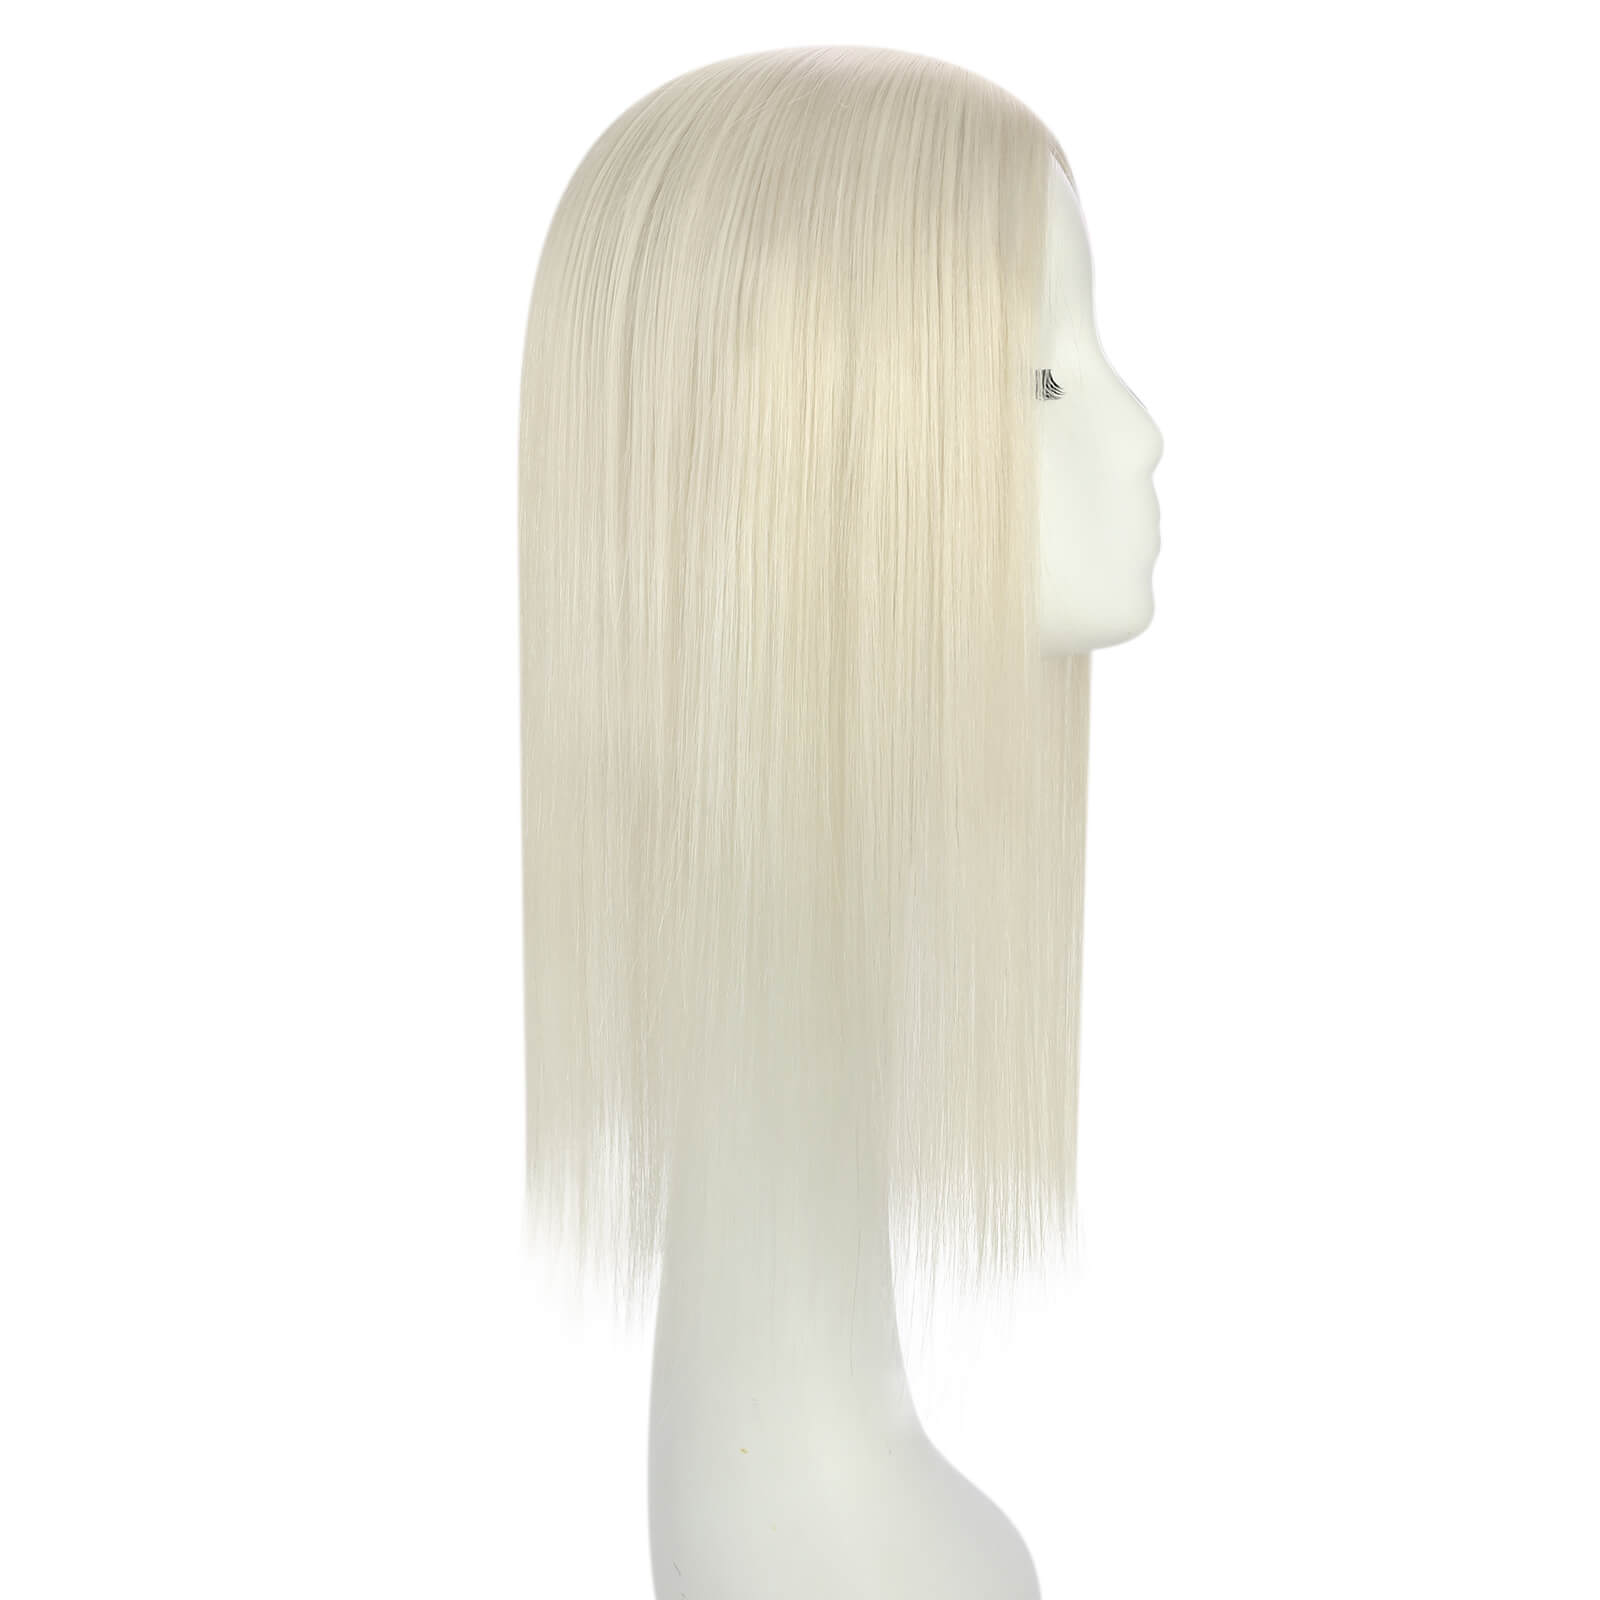 Hair Platinum Blonde Hair Piece Toppers for Women